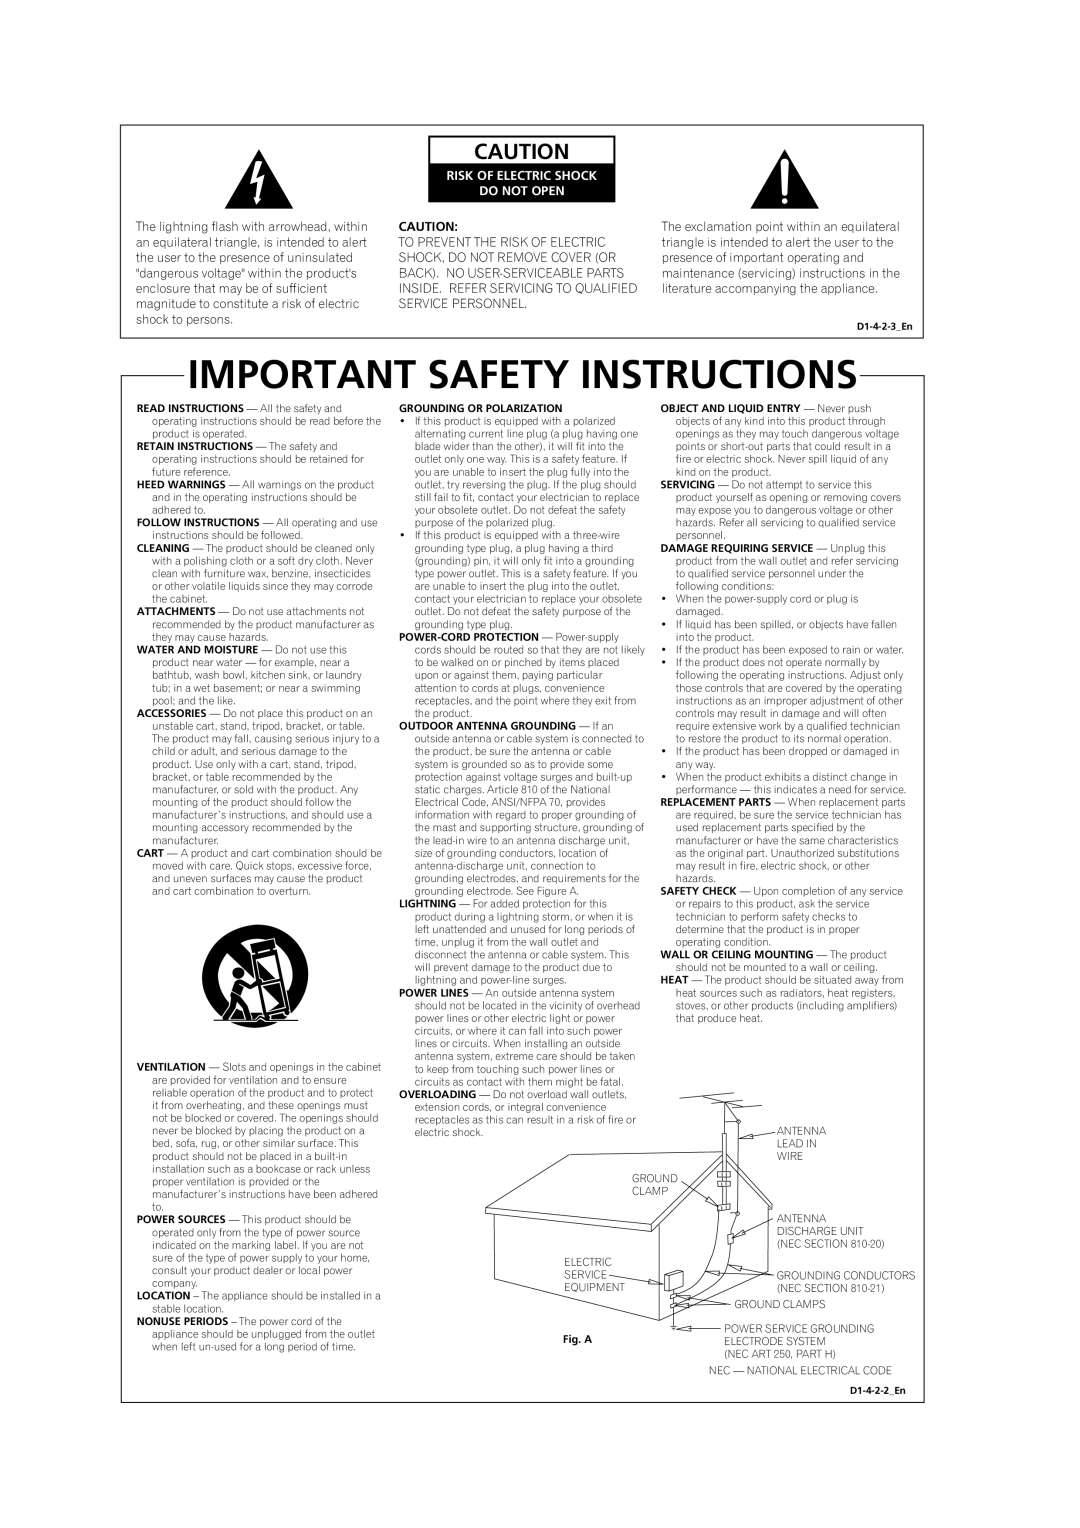 Pioneer VSX-90TXV operating instructions Important Safety Instructions, Risk Of Electric Shock Do Not Open 